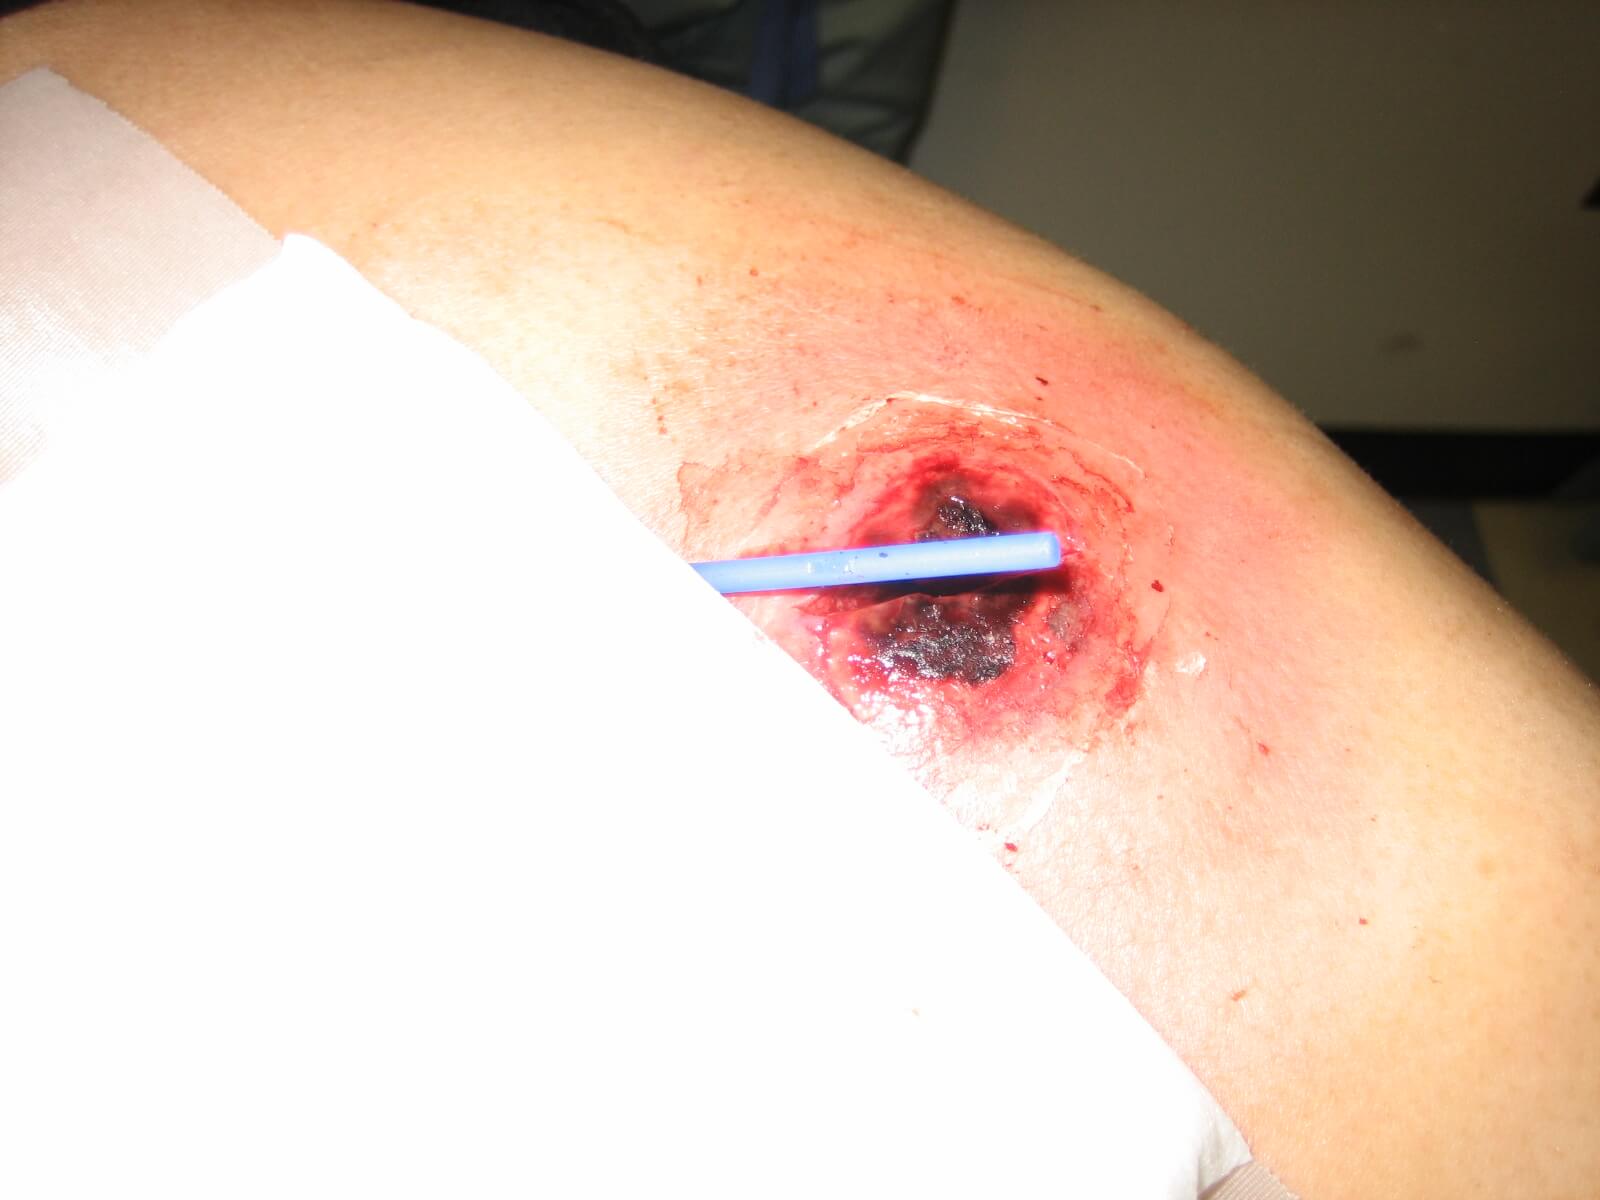 Derma-Stent being used with one incision on the abscess.